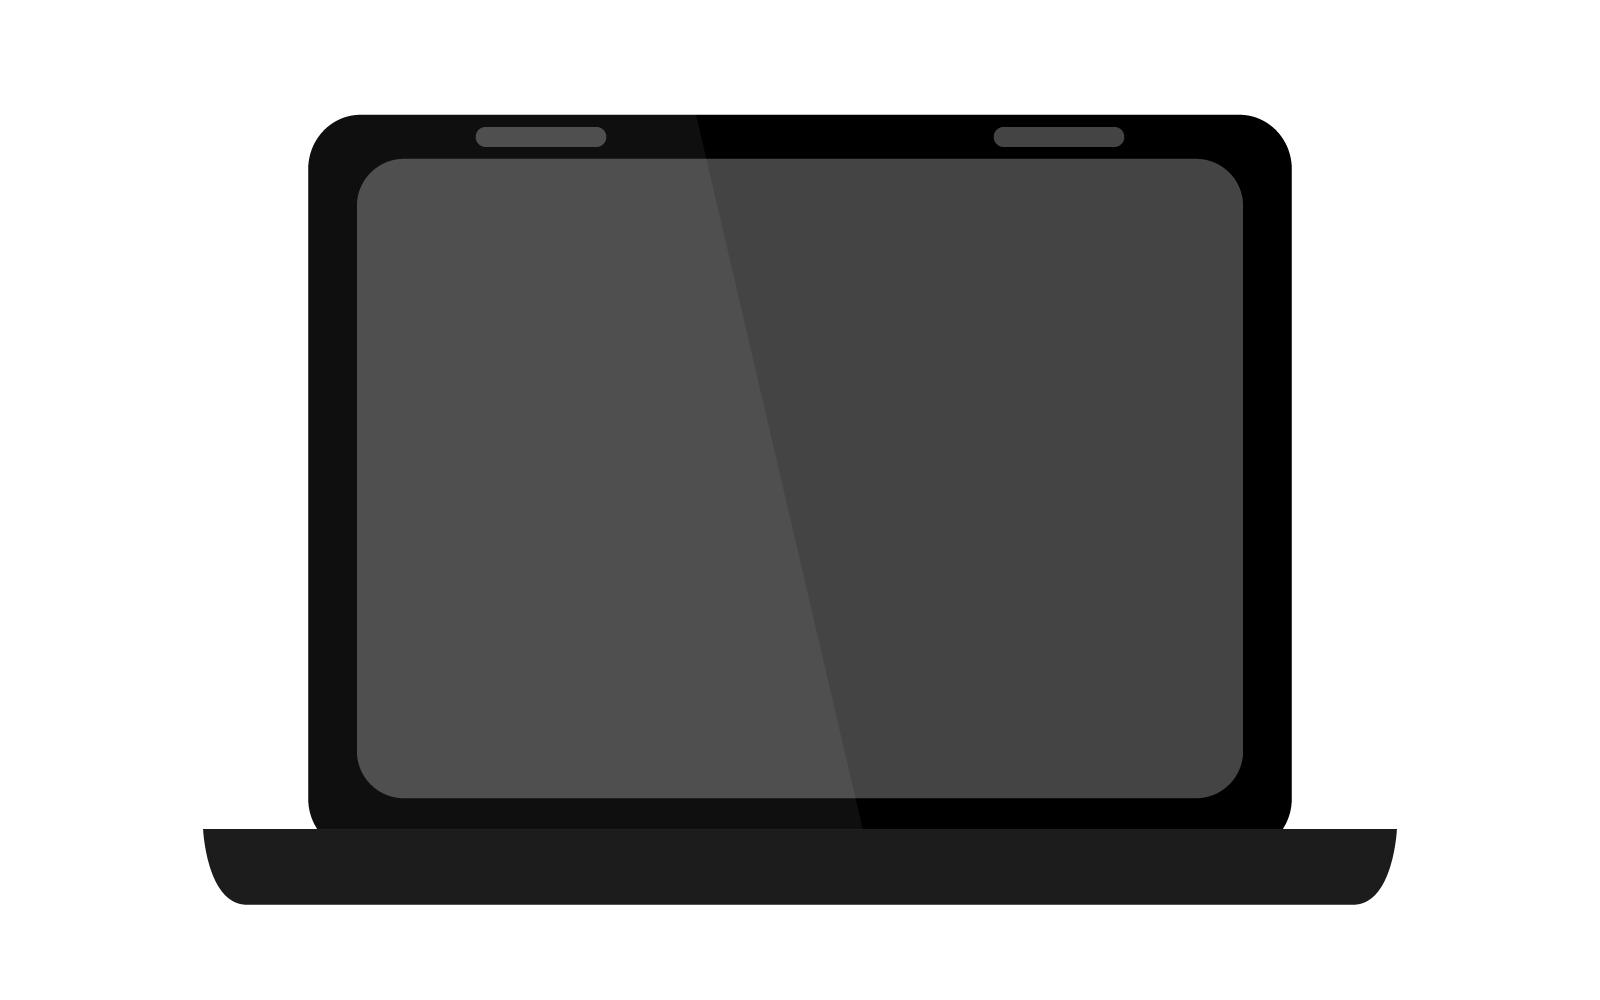 Laptop illustrated and colored in vector on a white background